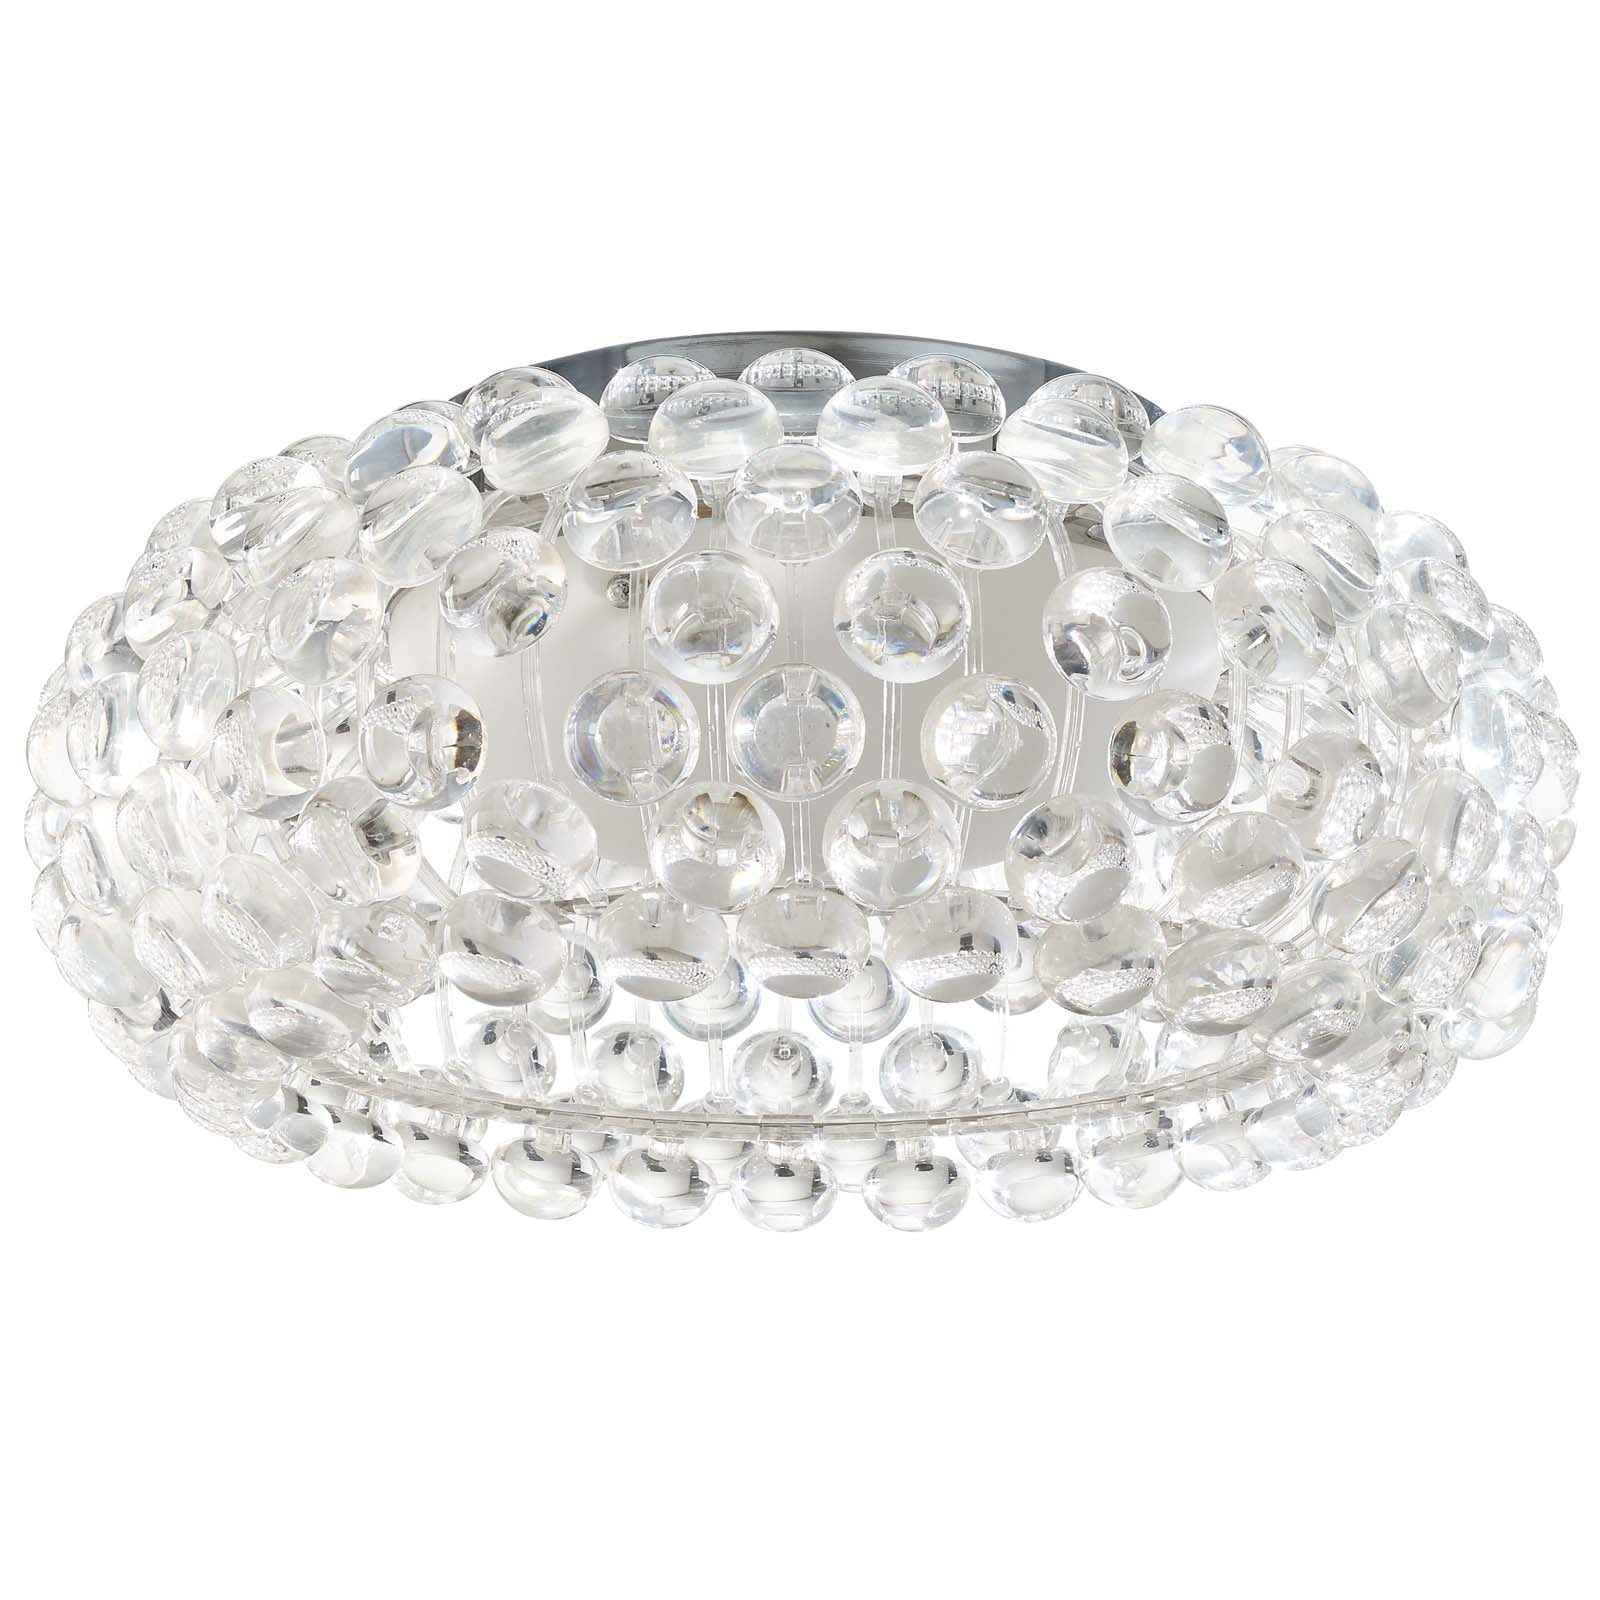 19" Acrylic Halo Chandelier - 60W - Designer Ceiling Fixture - UL listed